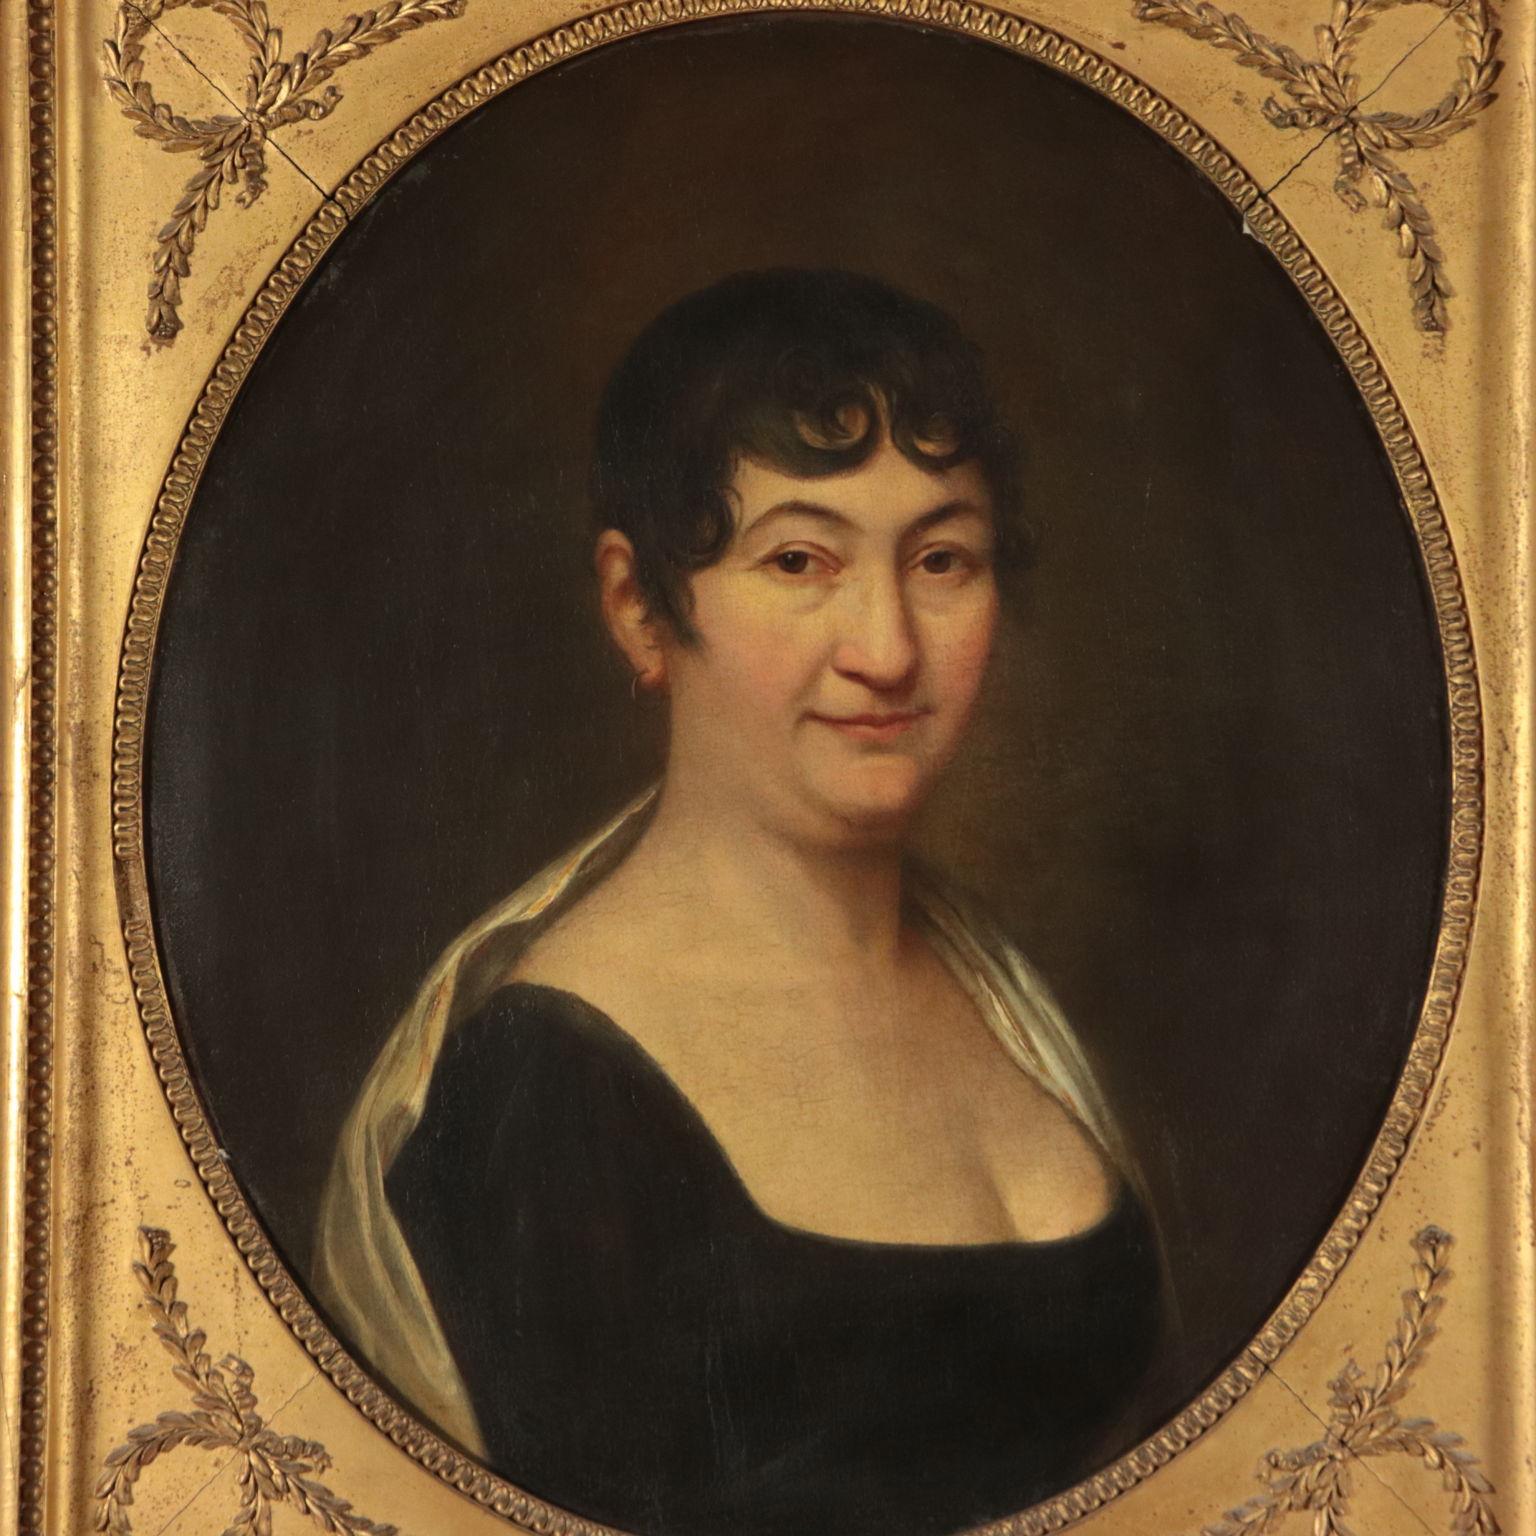 Portrait of Madame Sebatien Bottin, Oil on Canvas, 19th Century - Other Art Style Painting by Unknown